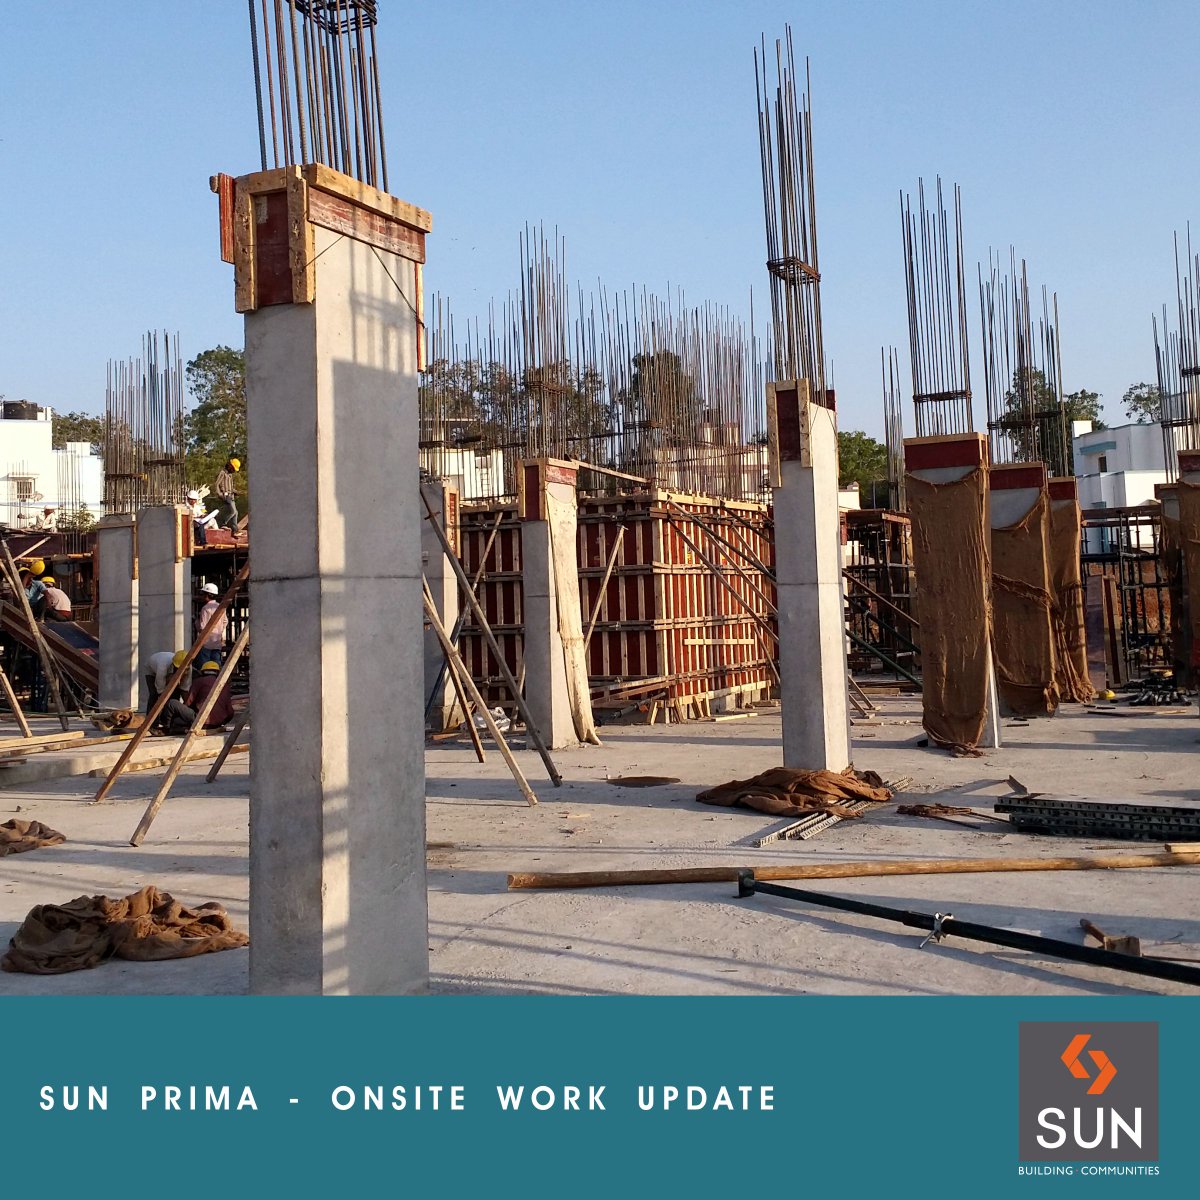 Sharing the construction progress at Sun Prima site at Manekbaug.
Please visit - https://t.co/6O9yJwzHRP #RealEstate https://t.co/hljHDWjyup